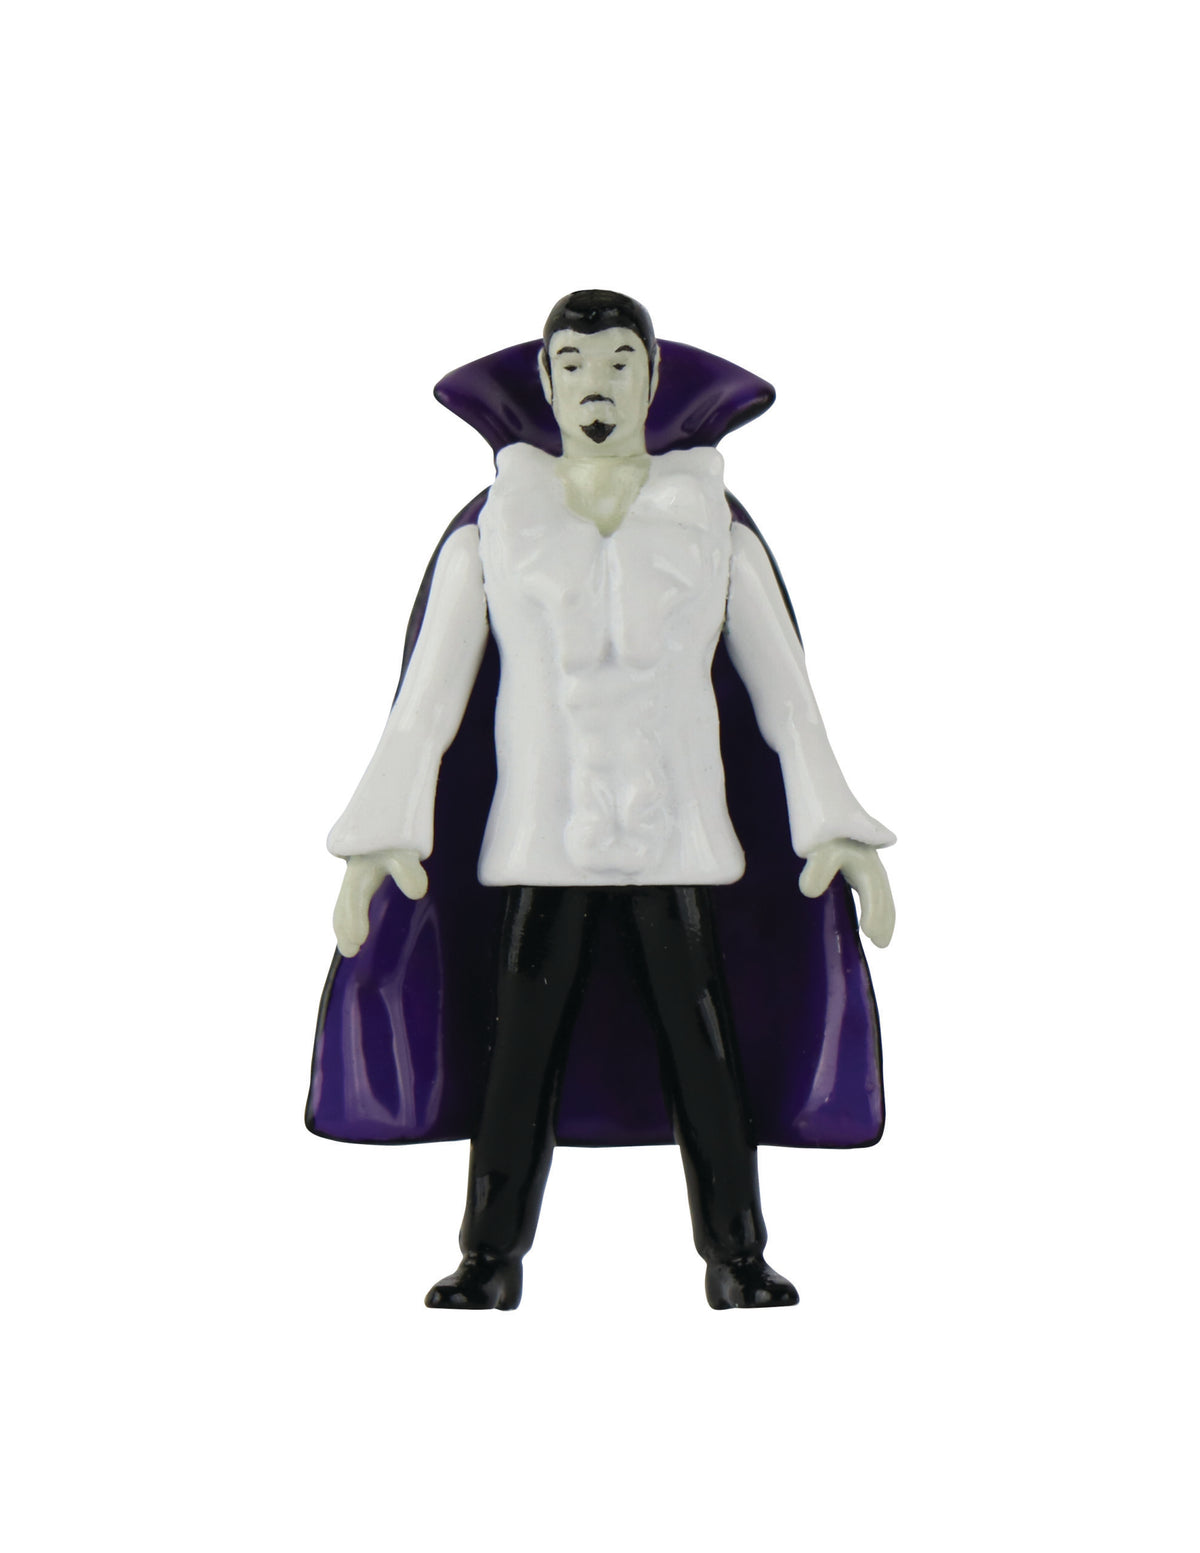 World's Smallest MEGO Horror Dracula Micro Action Figure - Zlc Collectibles